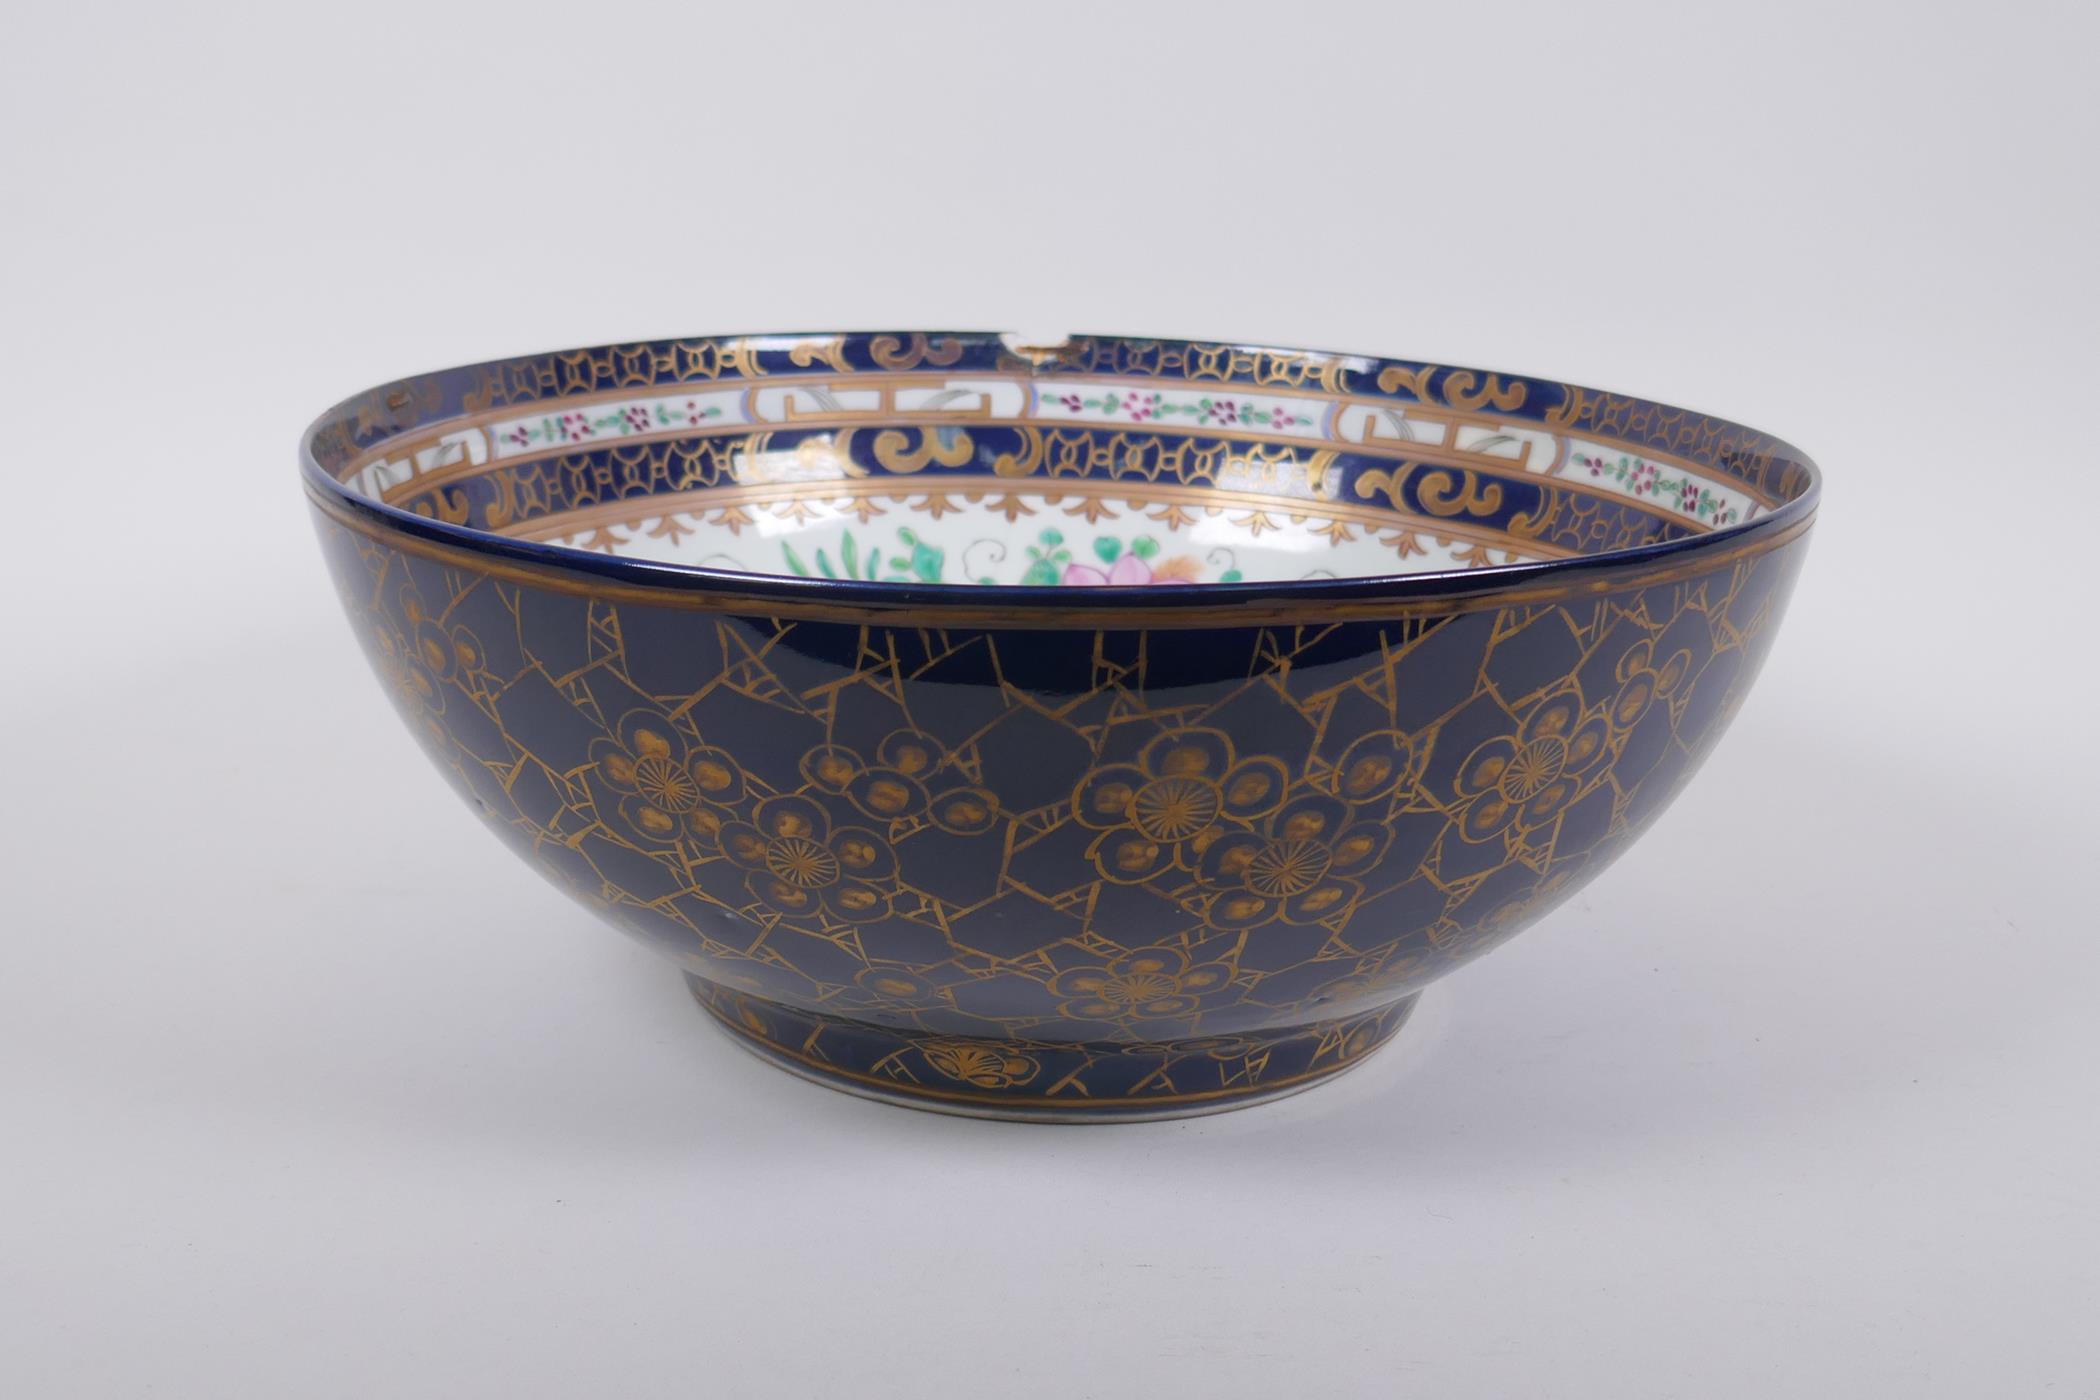 A late C19th/early C20th Chinese export ware punch bowl, the interior decorated with famille rose